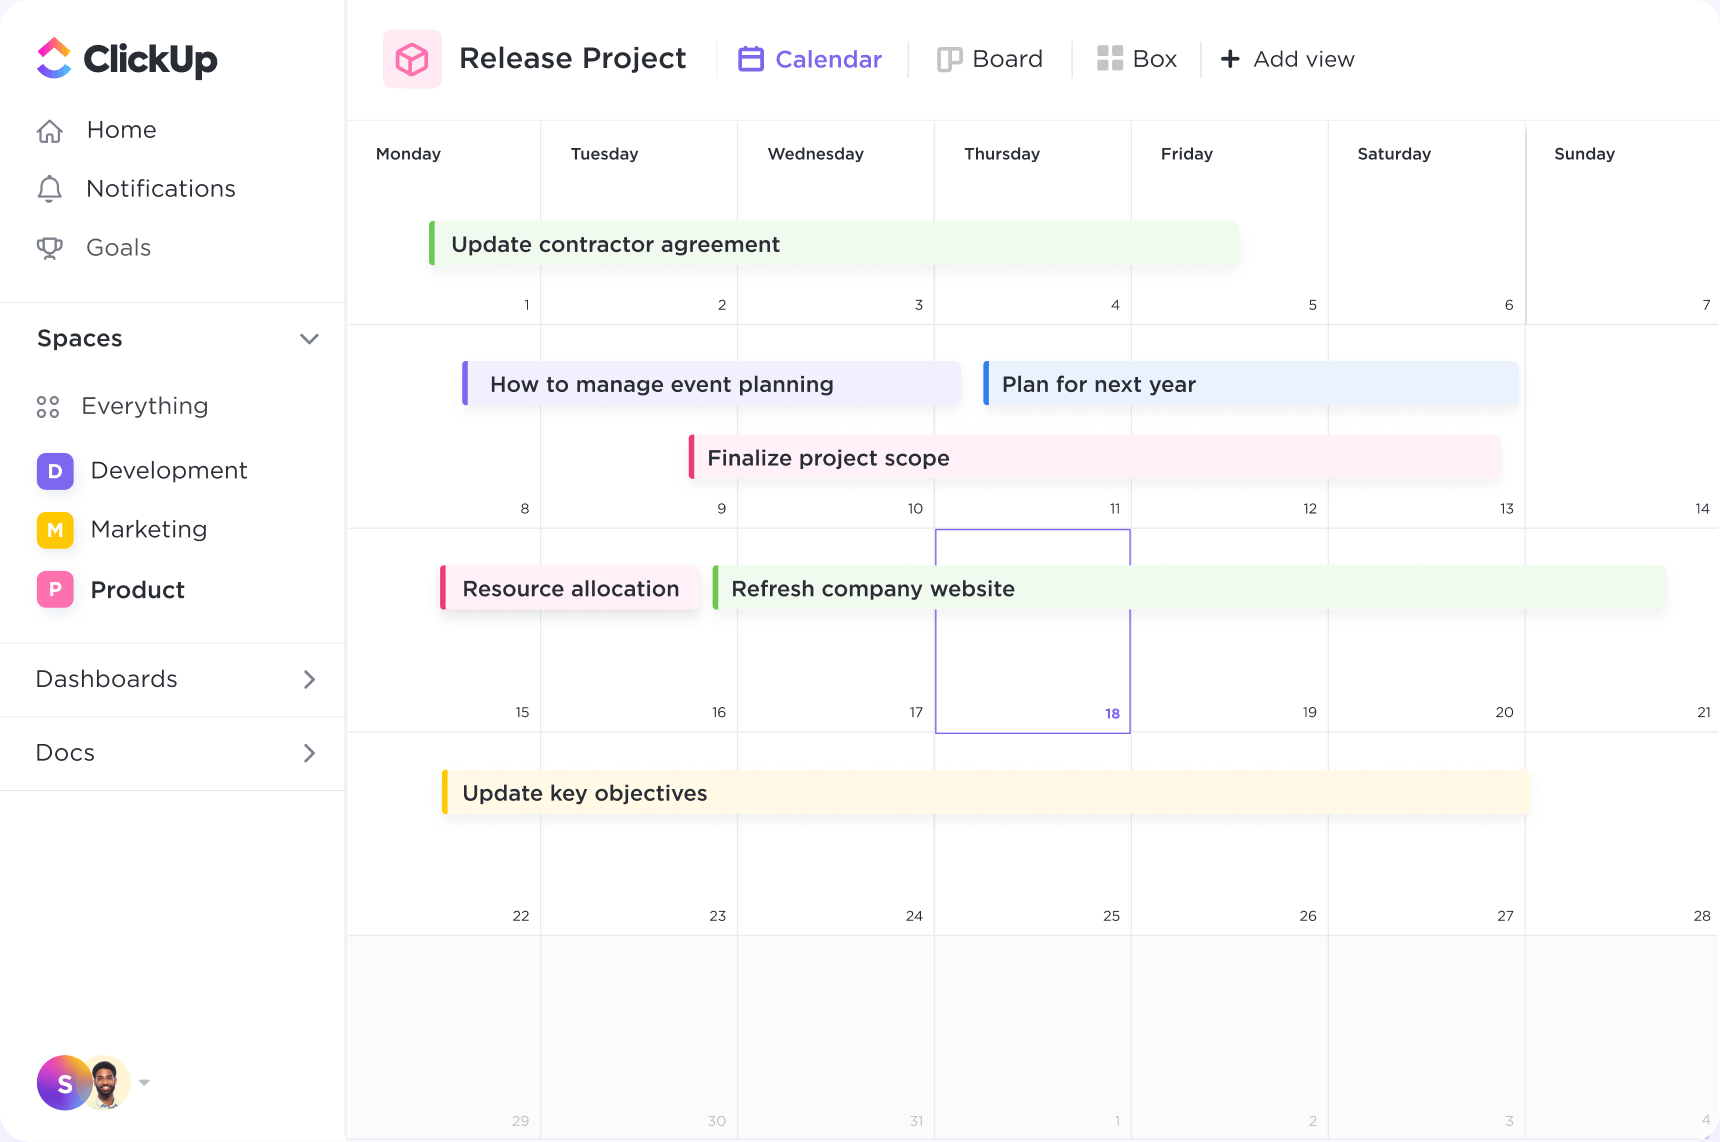 Image of ClickUp's calendar view. Image of an example month showing Monday through Sunday and 4 weeks. Tasks are color coded to represent their status and can span over one day or multiple days